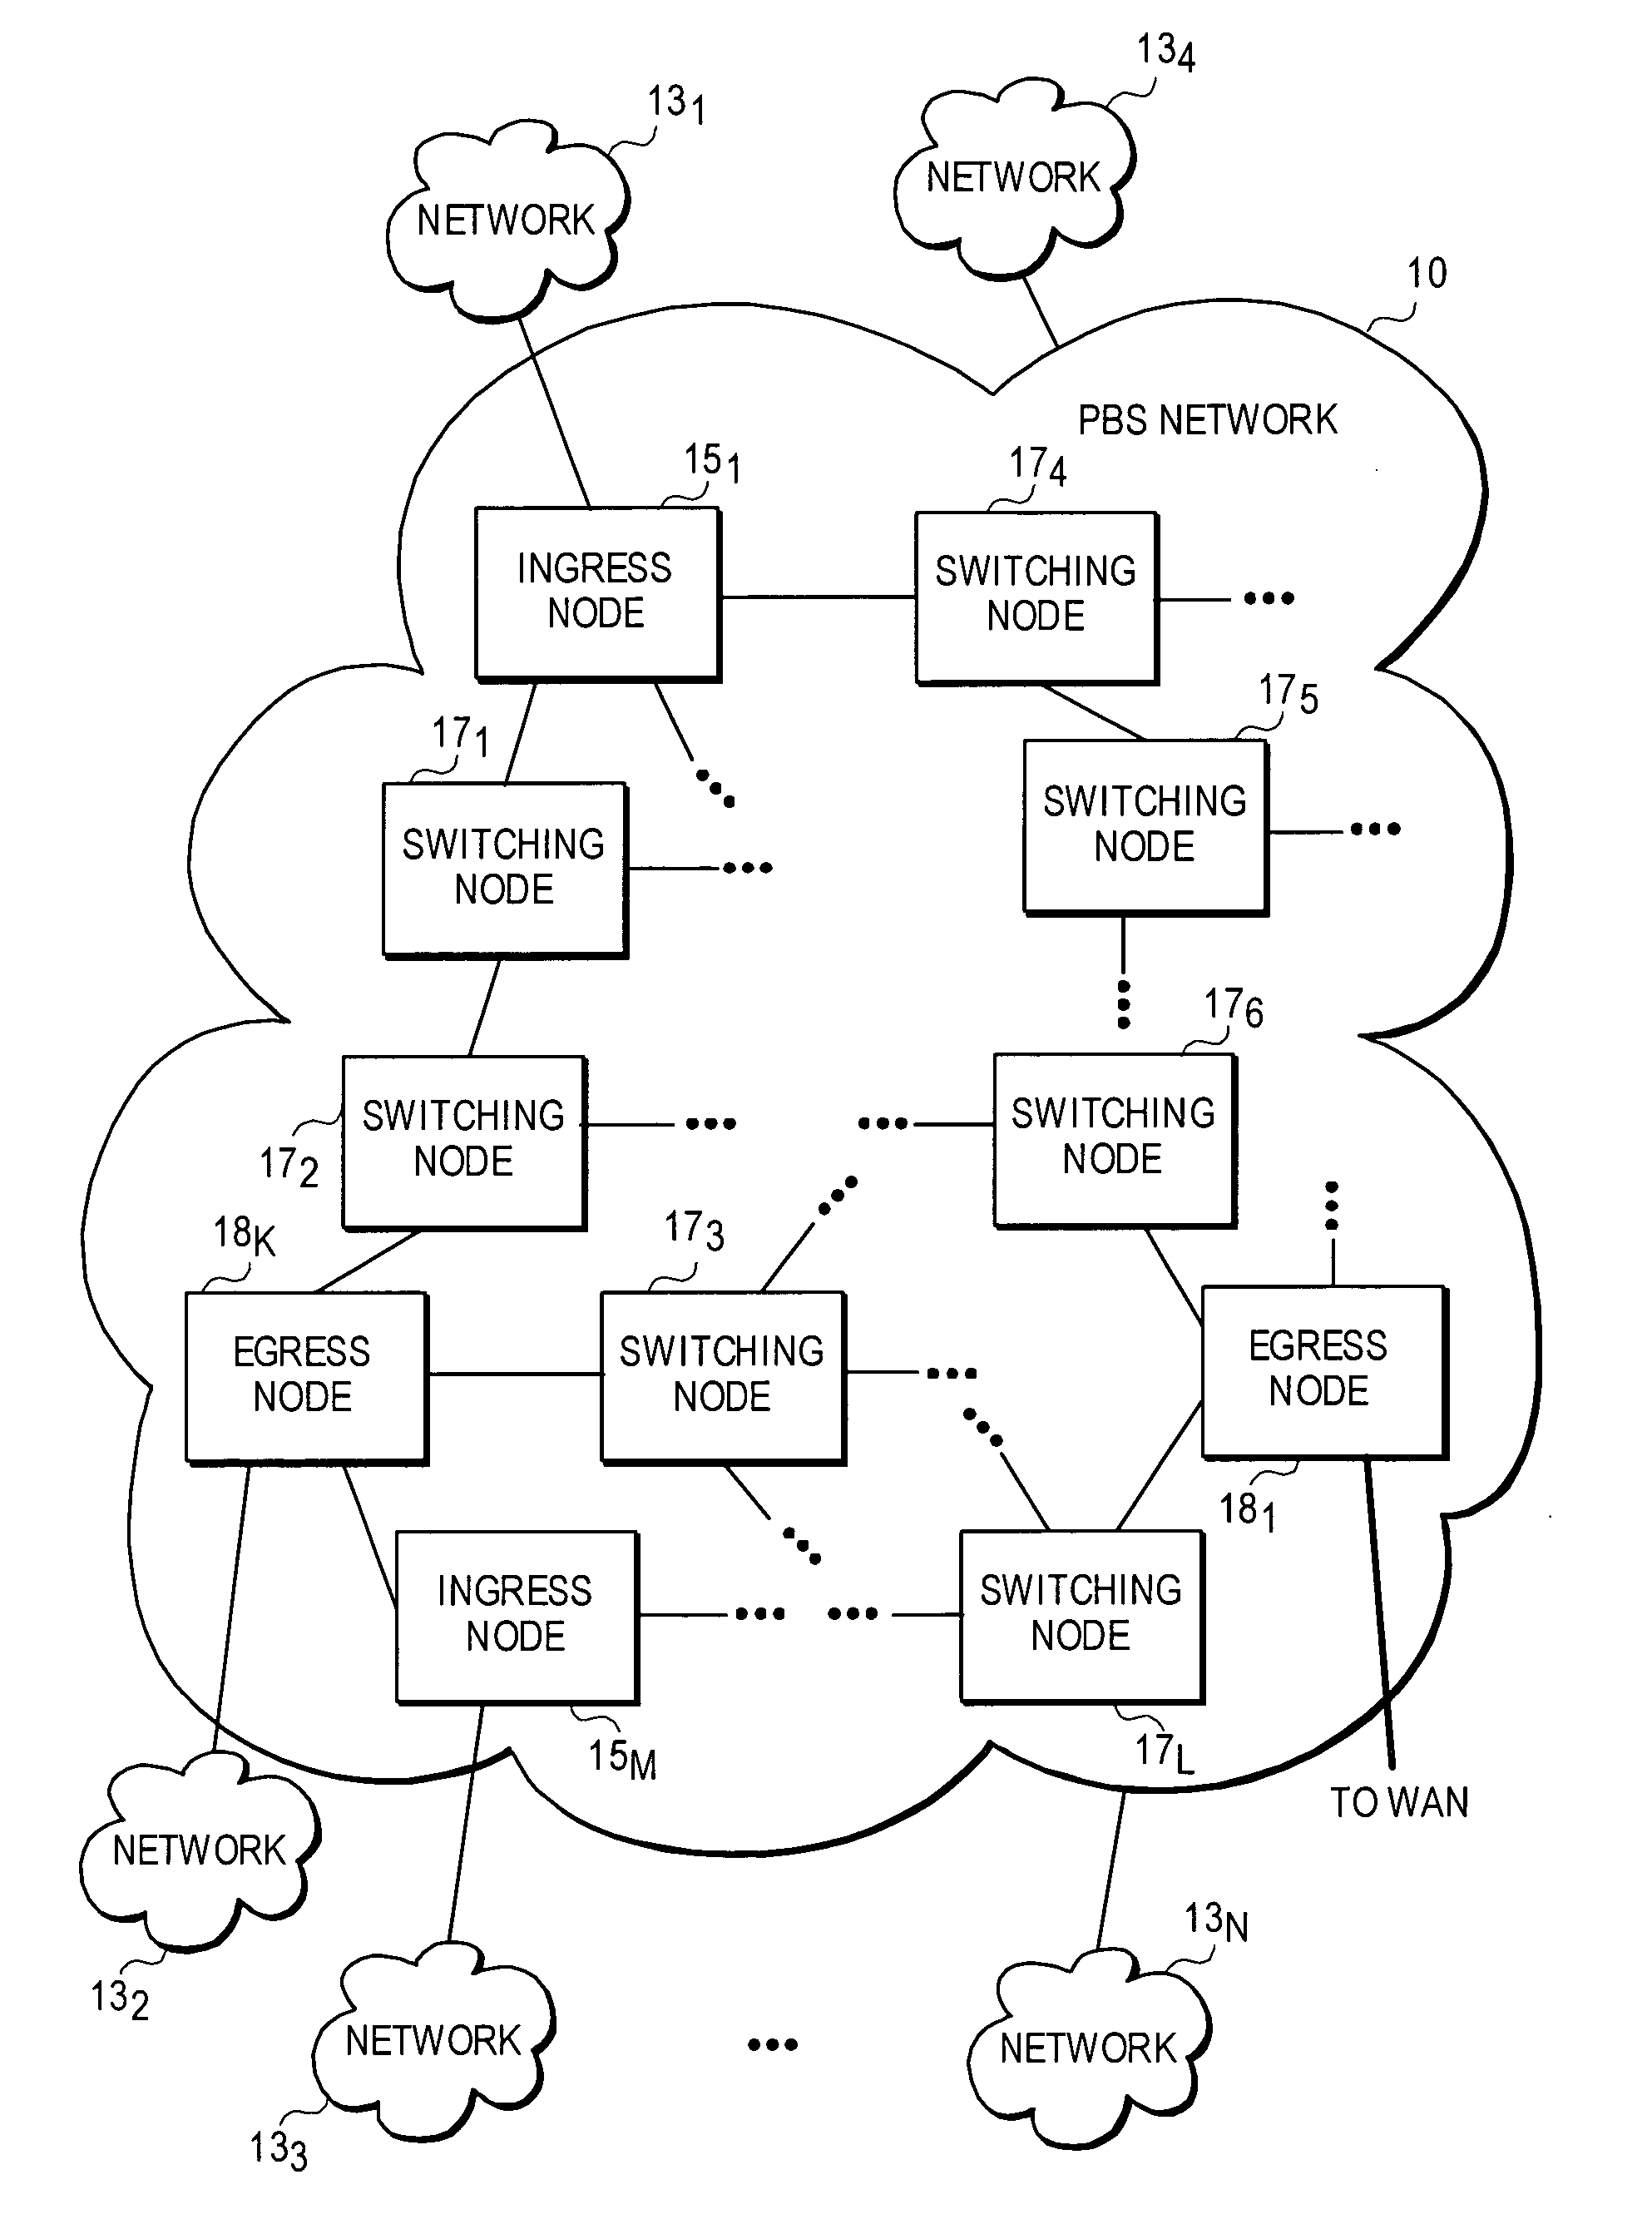 Dynamic route discovery for optical switched networks using peer routing